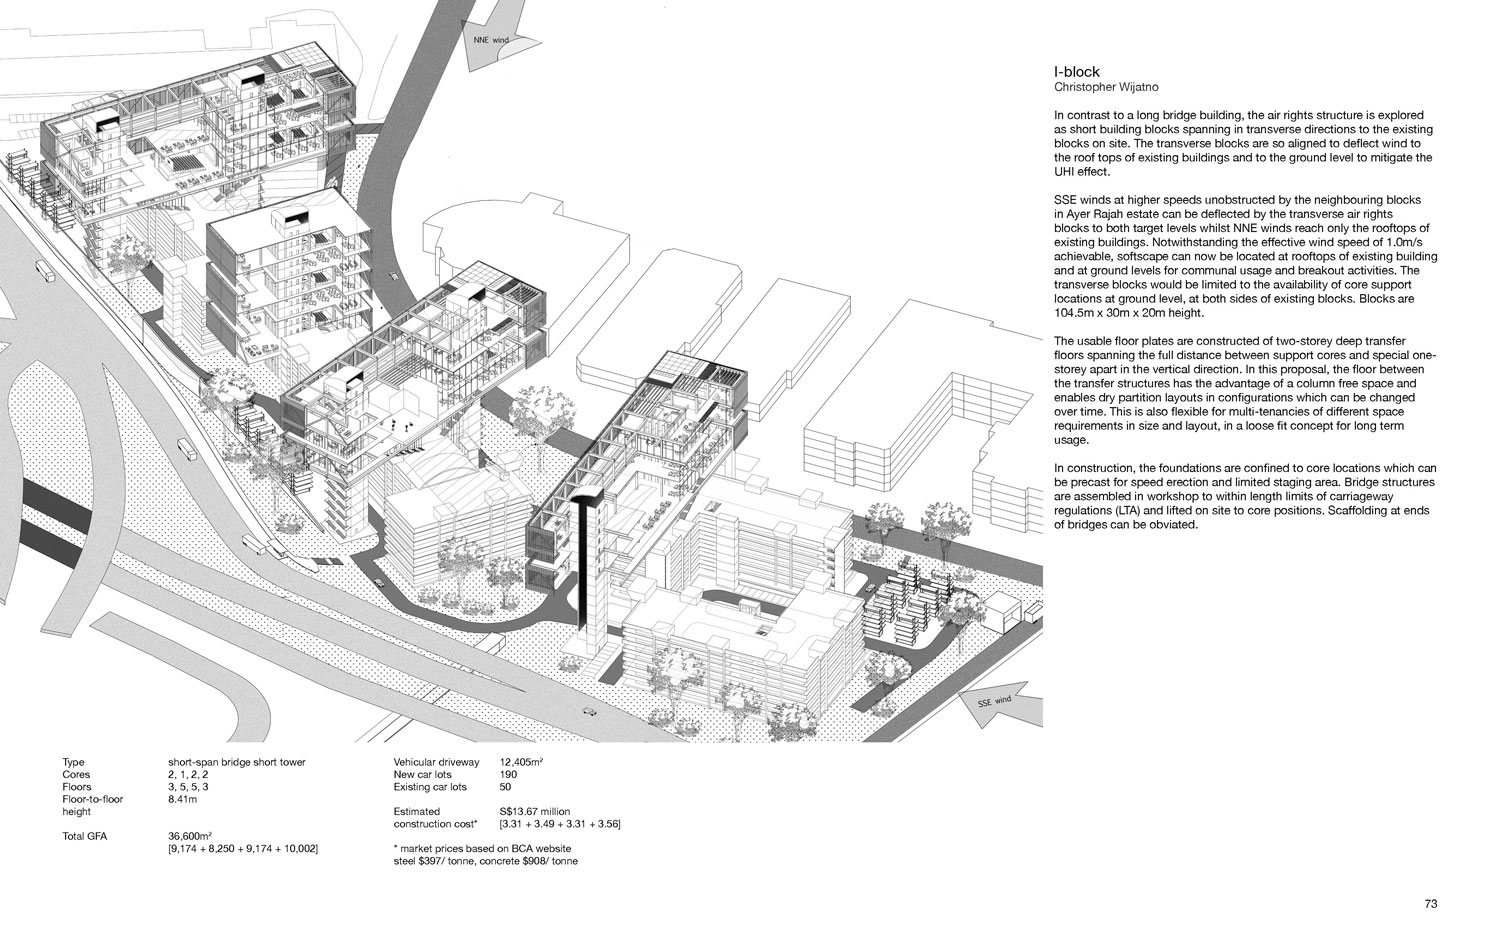 skybridge-air-rights-structure-industry-JTC-NUS